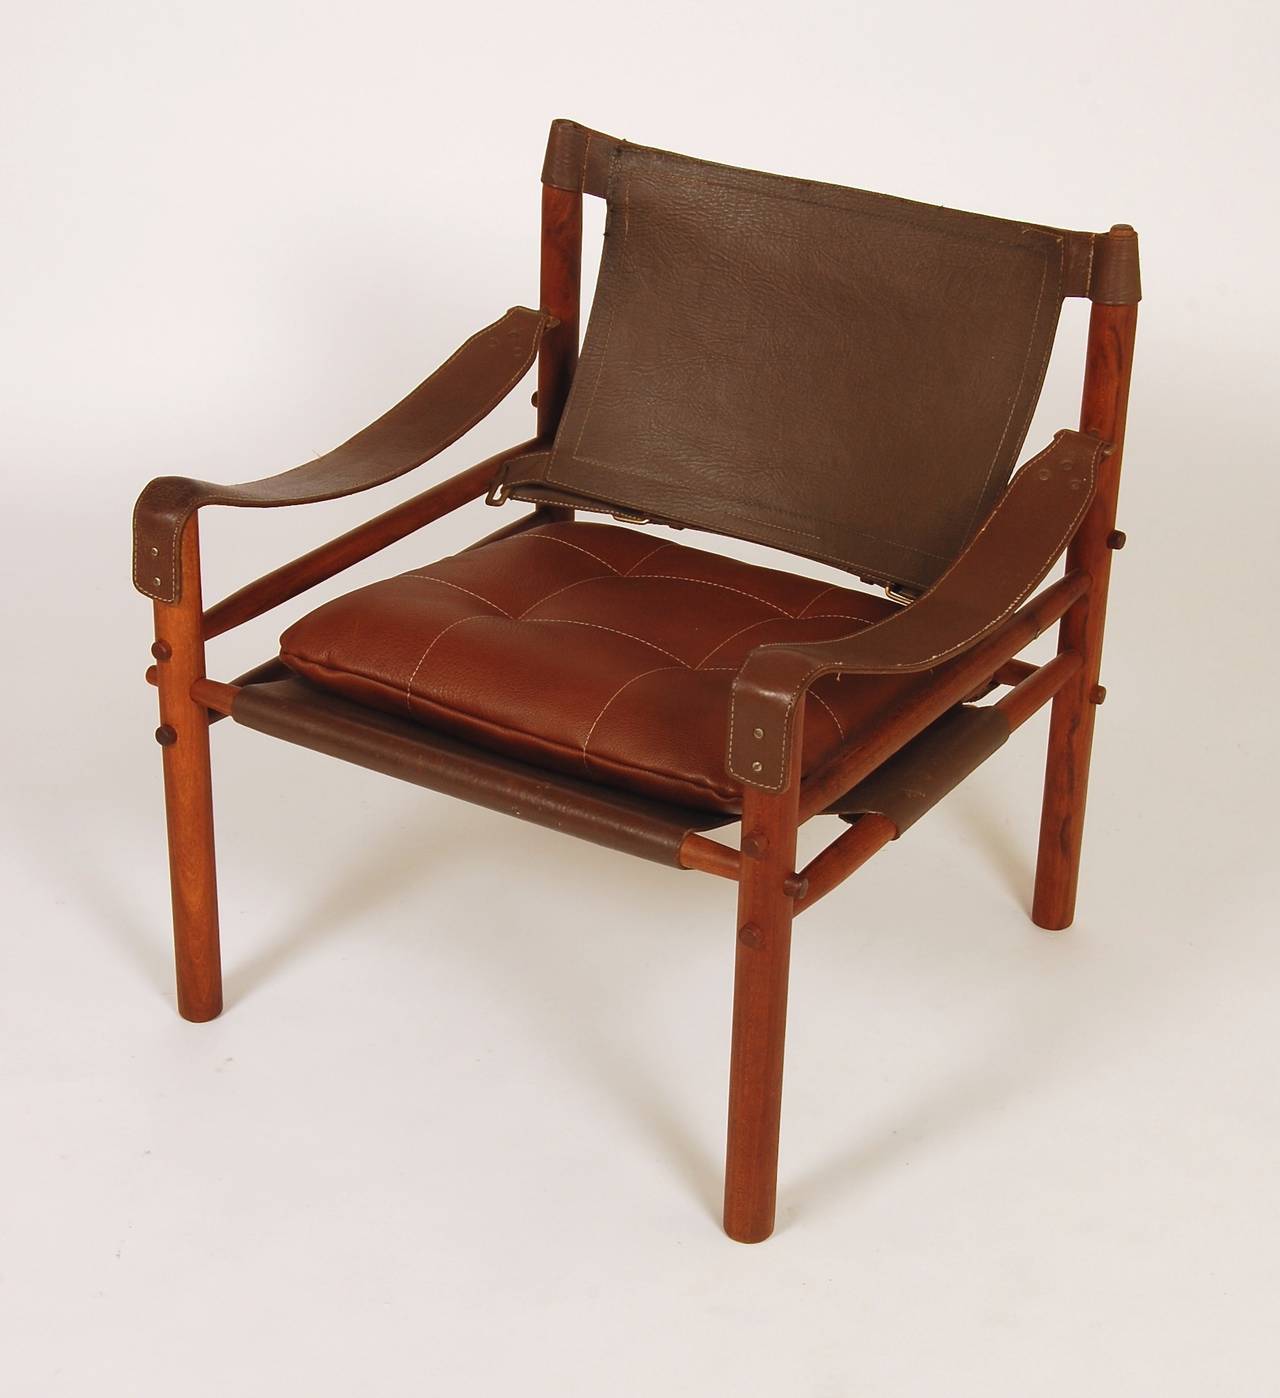 Safari chair by Swedish designer Arne Norell in a brown textured leather with a new cushion and a teak frame. The brass hardware has a soft patina to the finish.